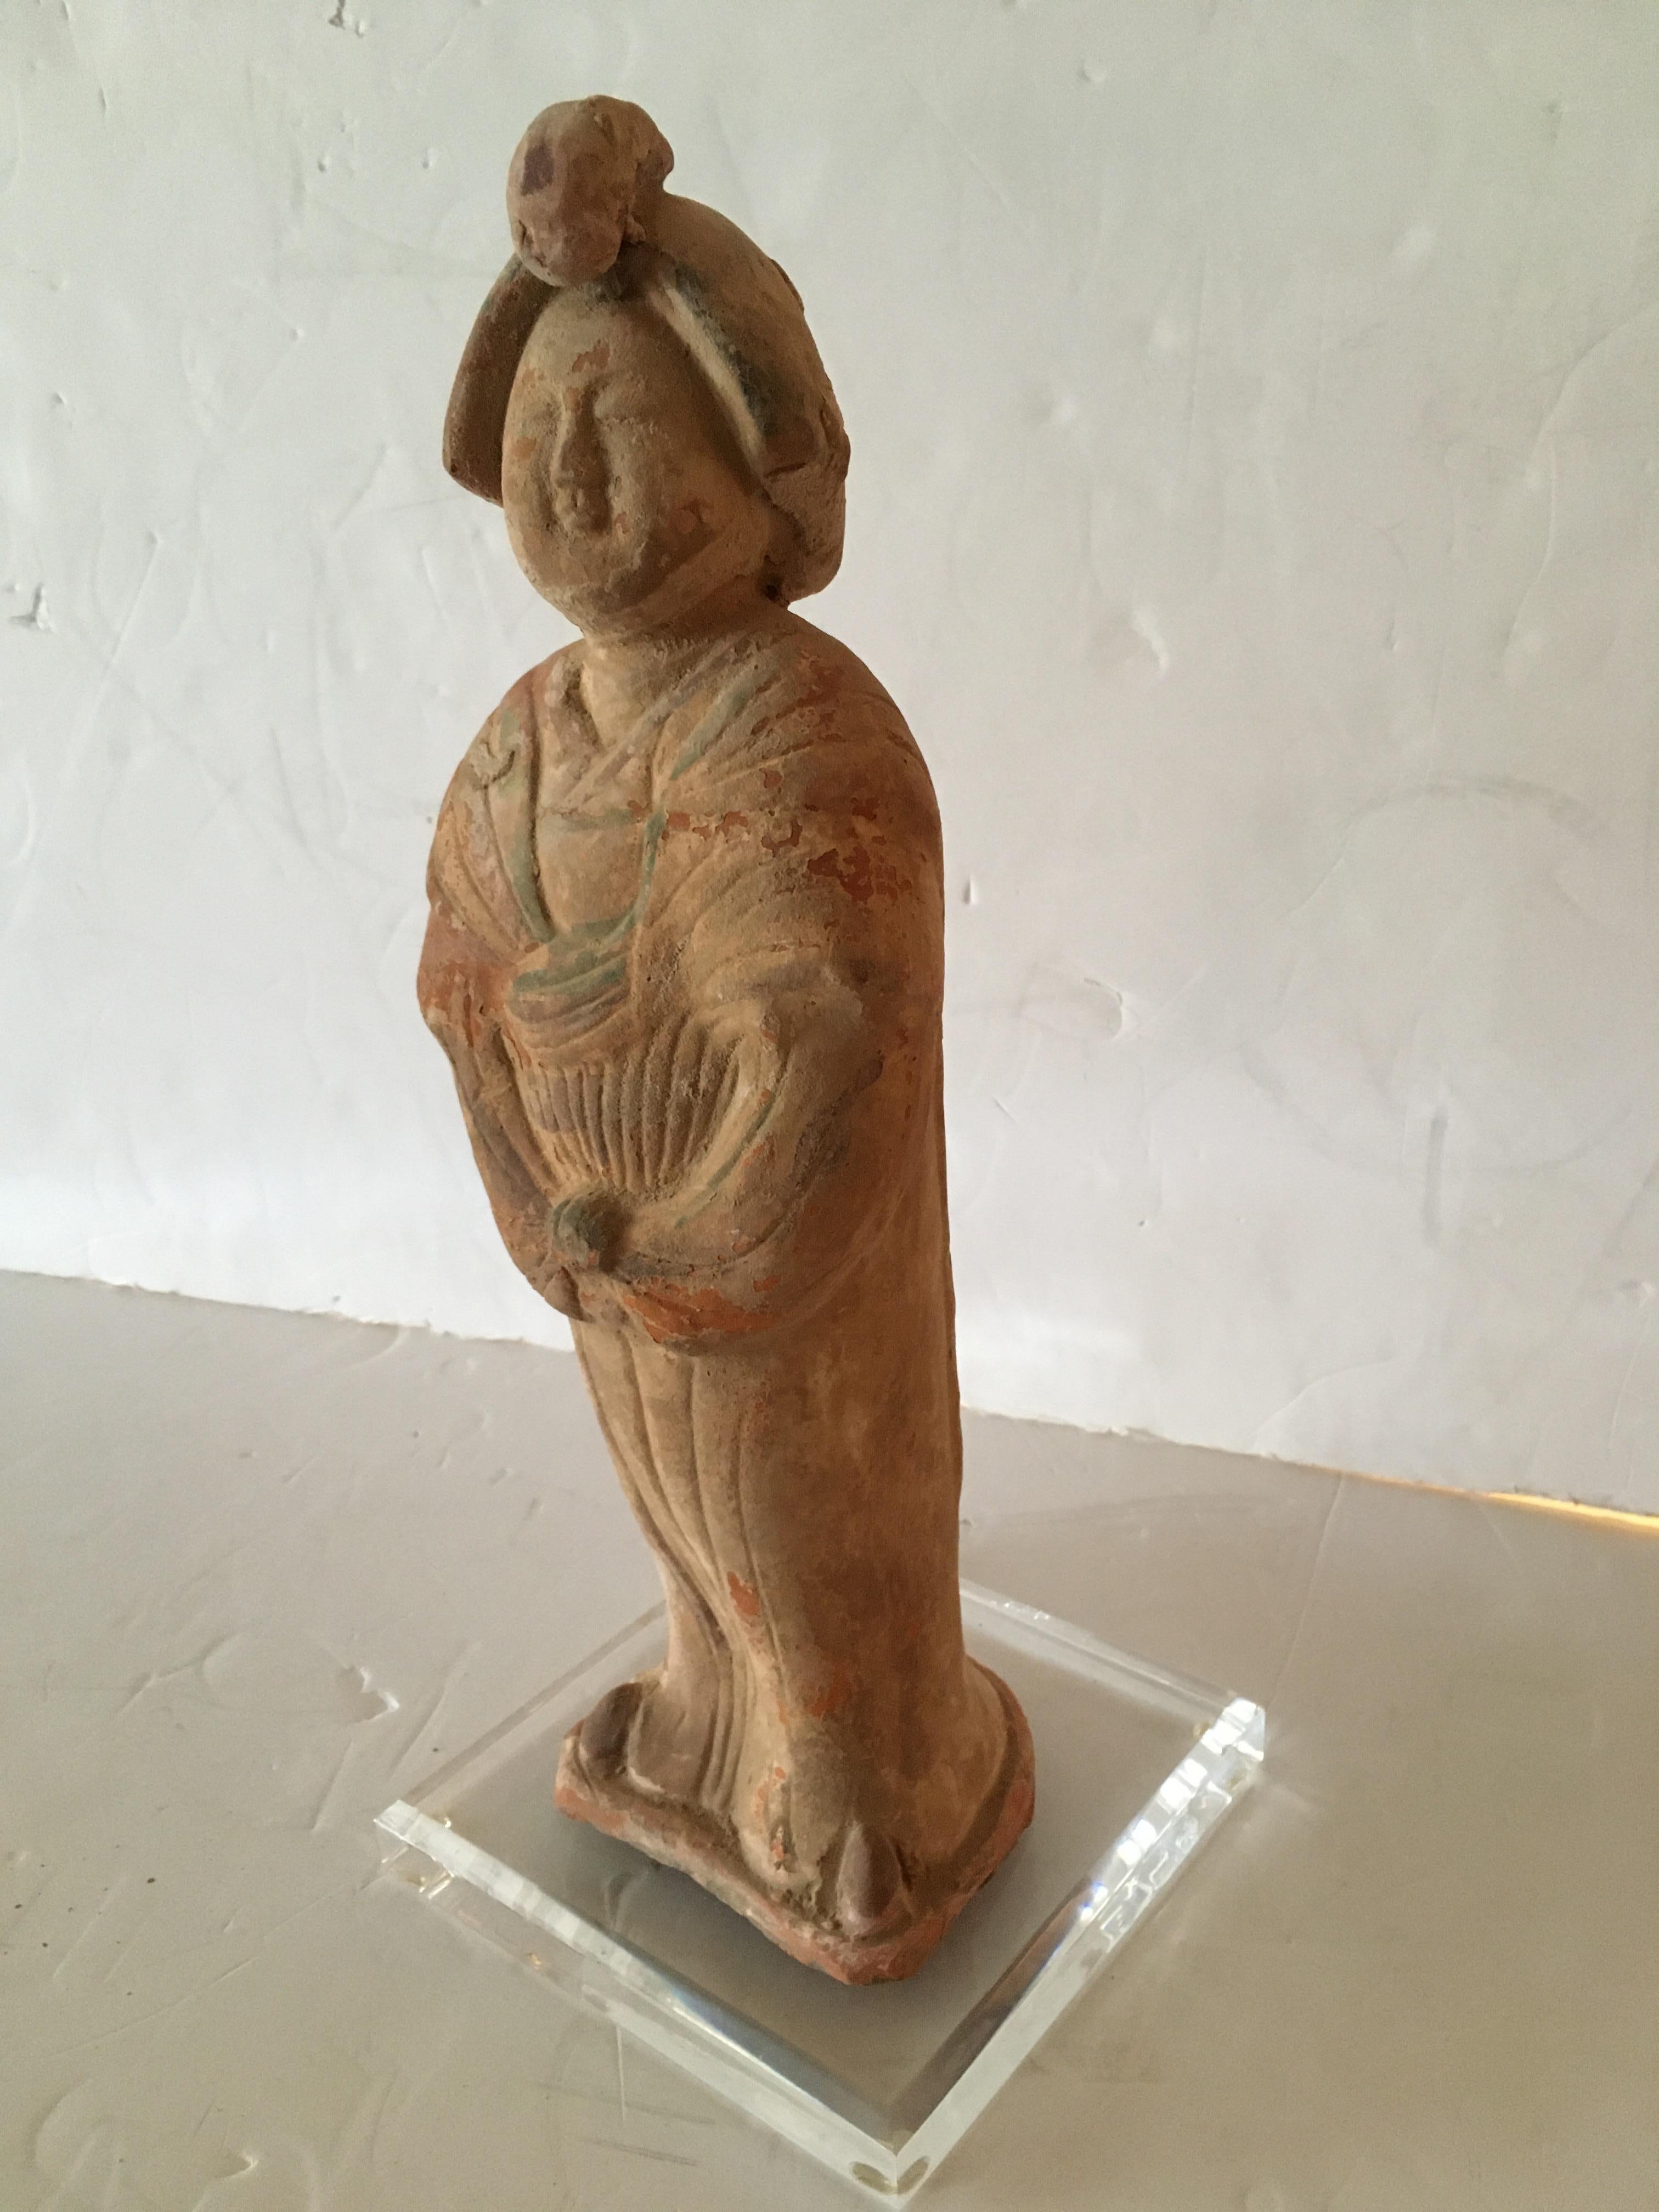 Lovely terracotta sculpture of an Asian figure with beautiful weathered patina. Custom lucite base.